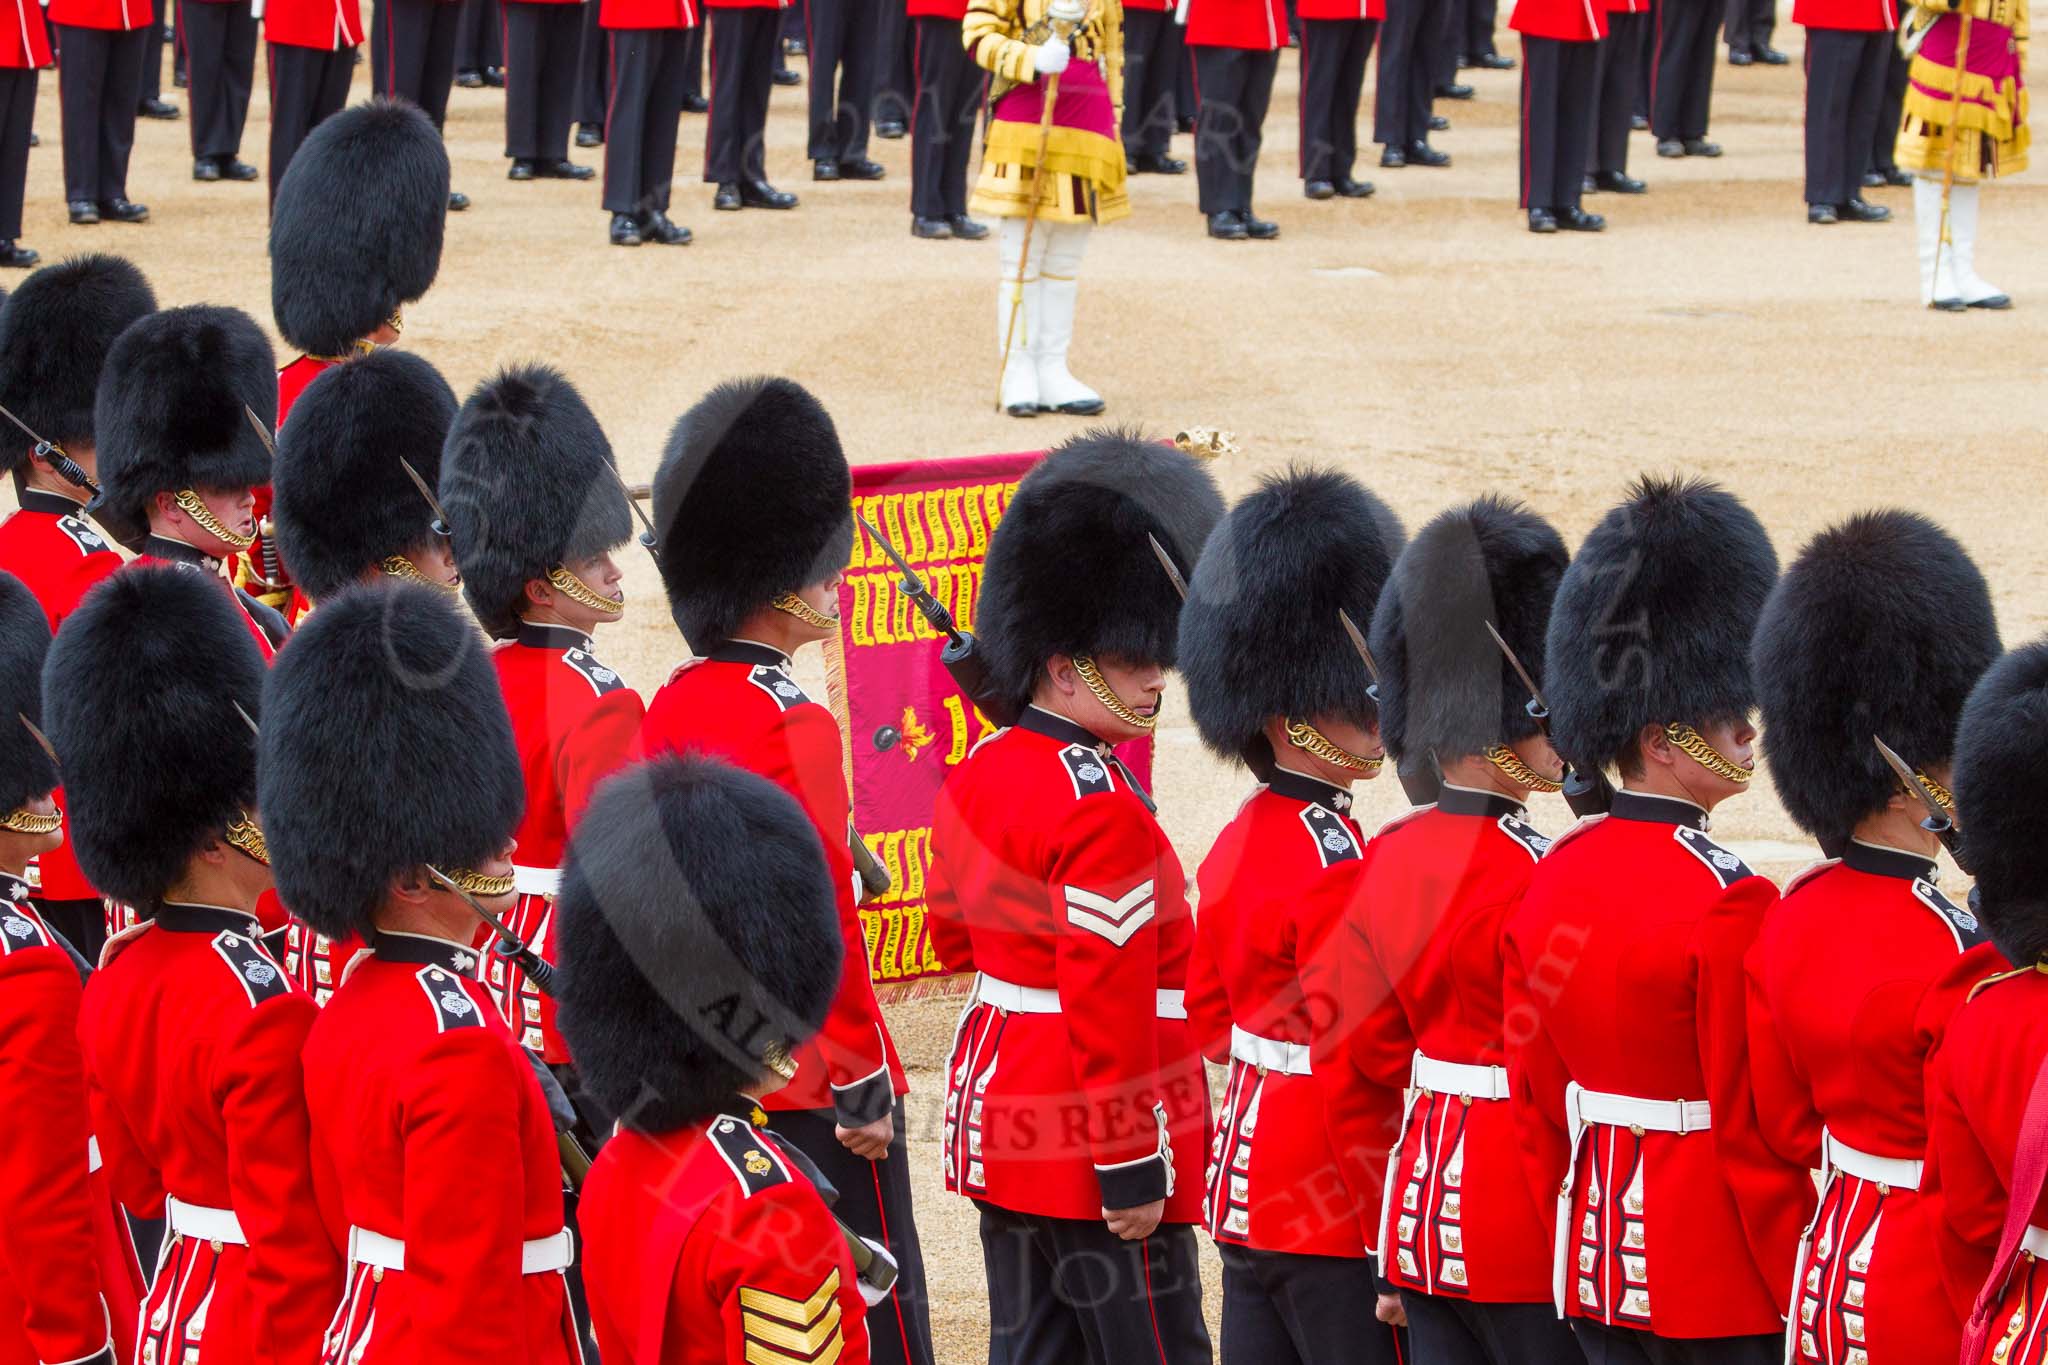 Trooping the Colour 2014.
Horse Guards Parade, Westminster,
London SW1A,

United Kingdom,
on 14 June 2014 at 11:37, image #632